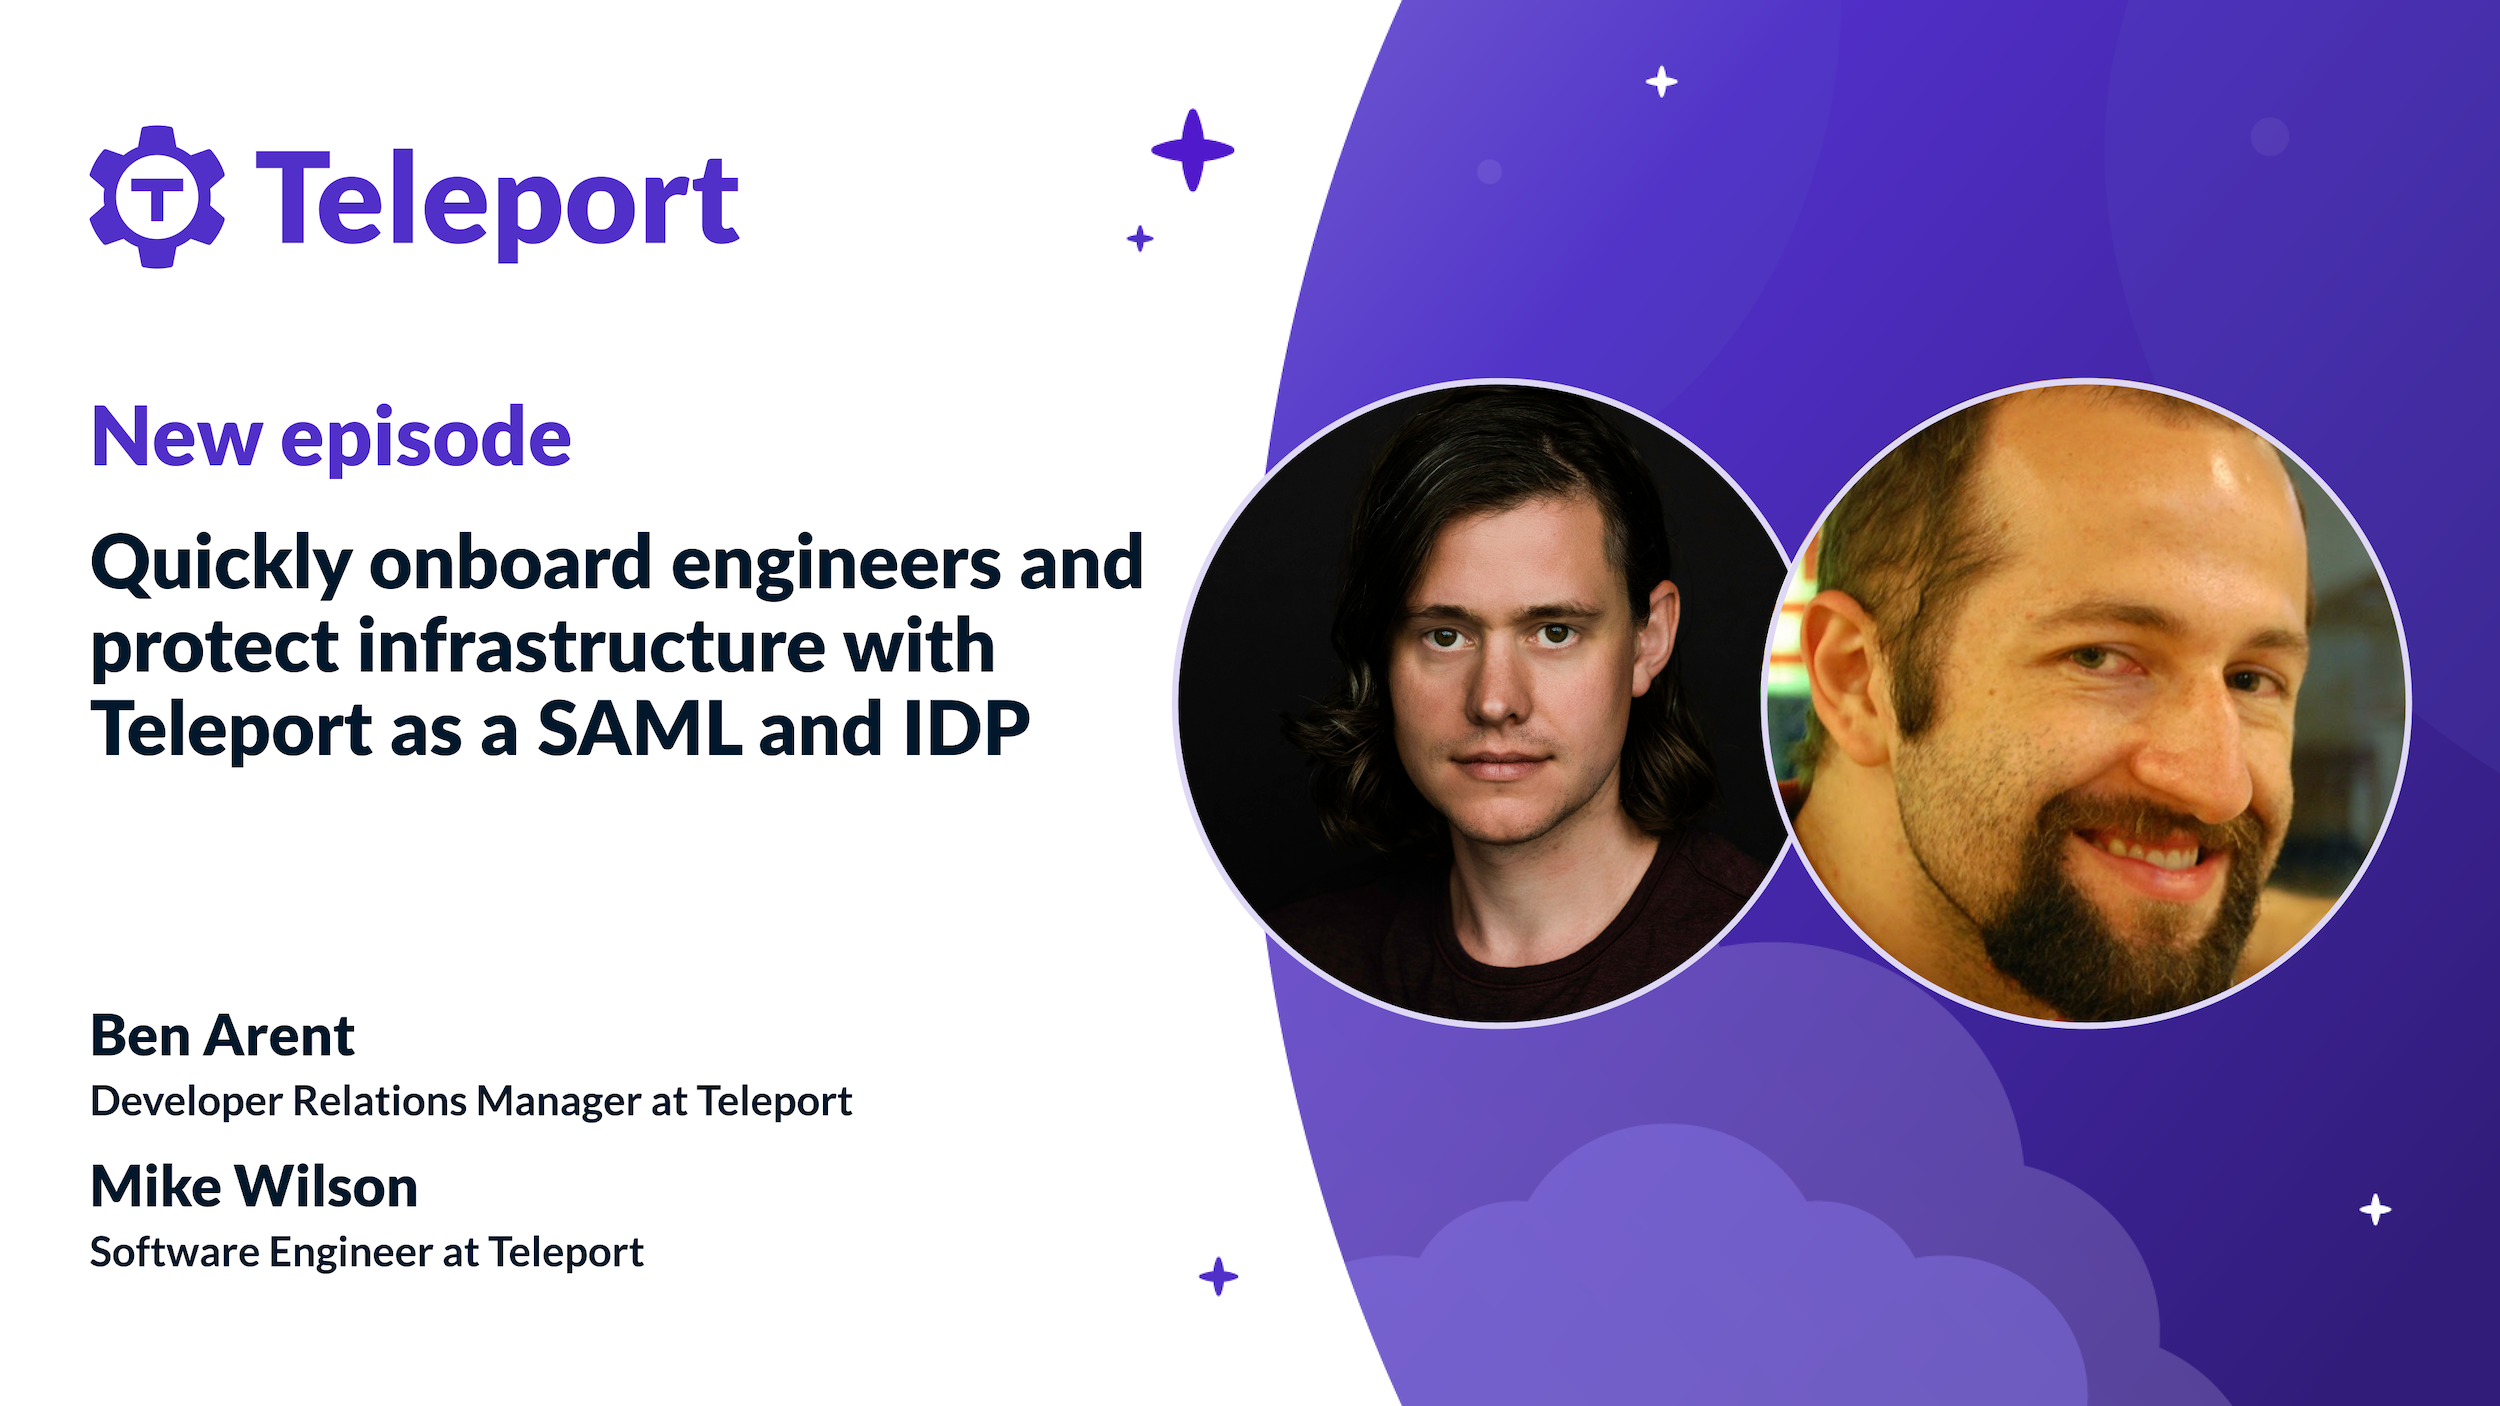 Quickly onboard engineers and protect infrastructure with Teleport as a SAML and IDP